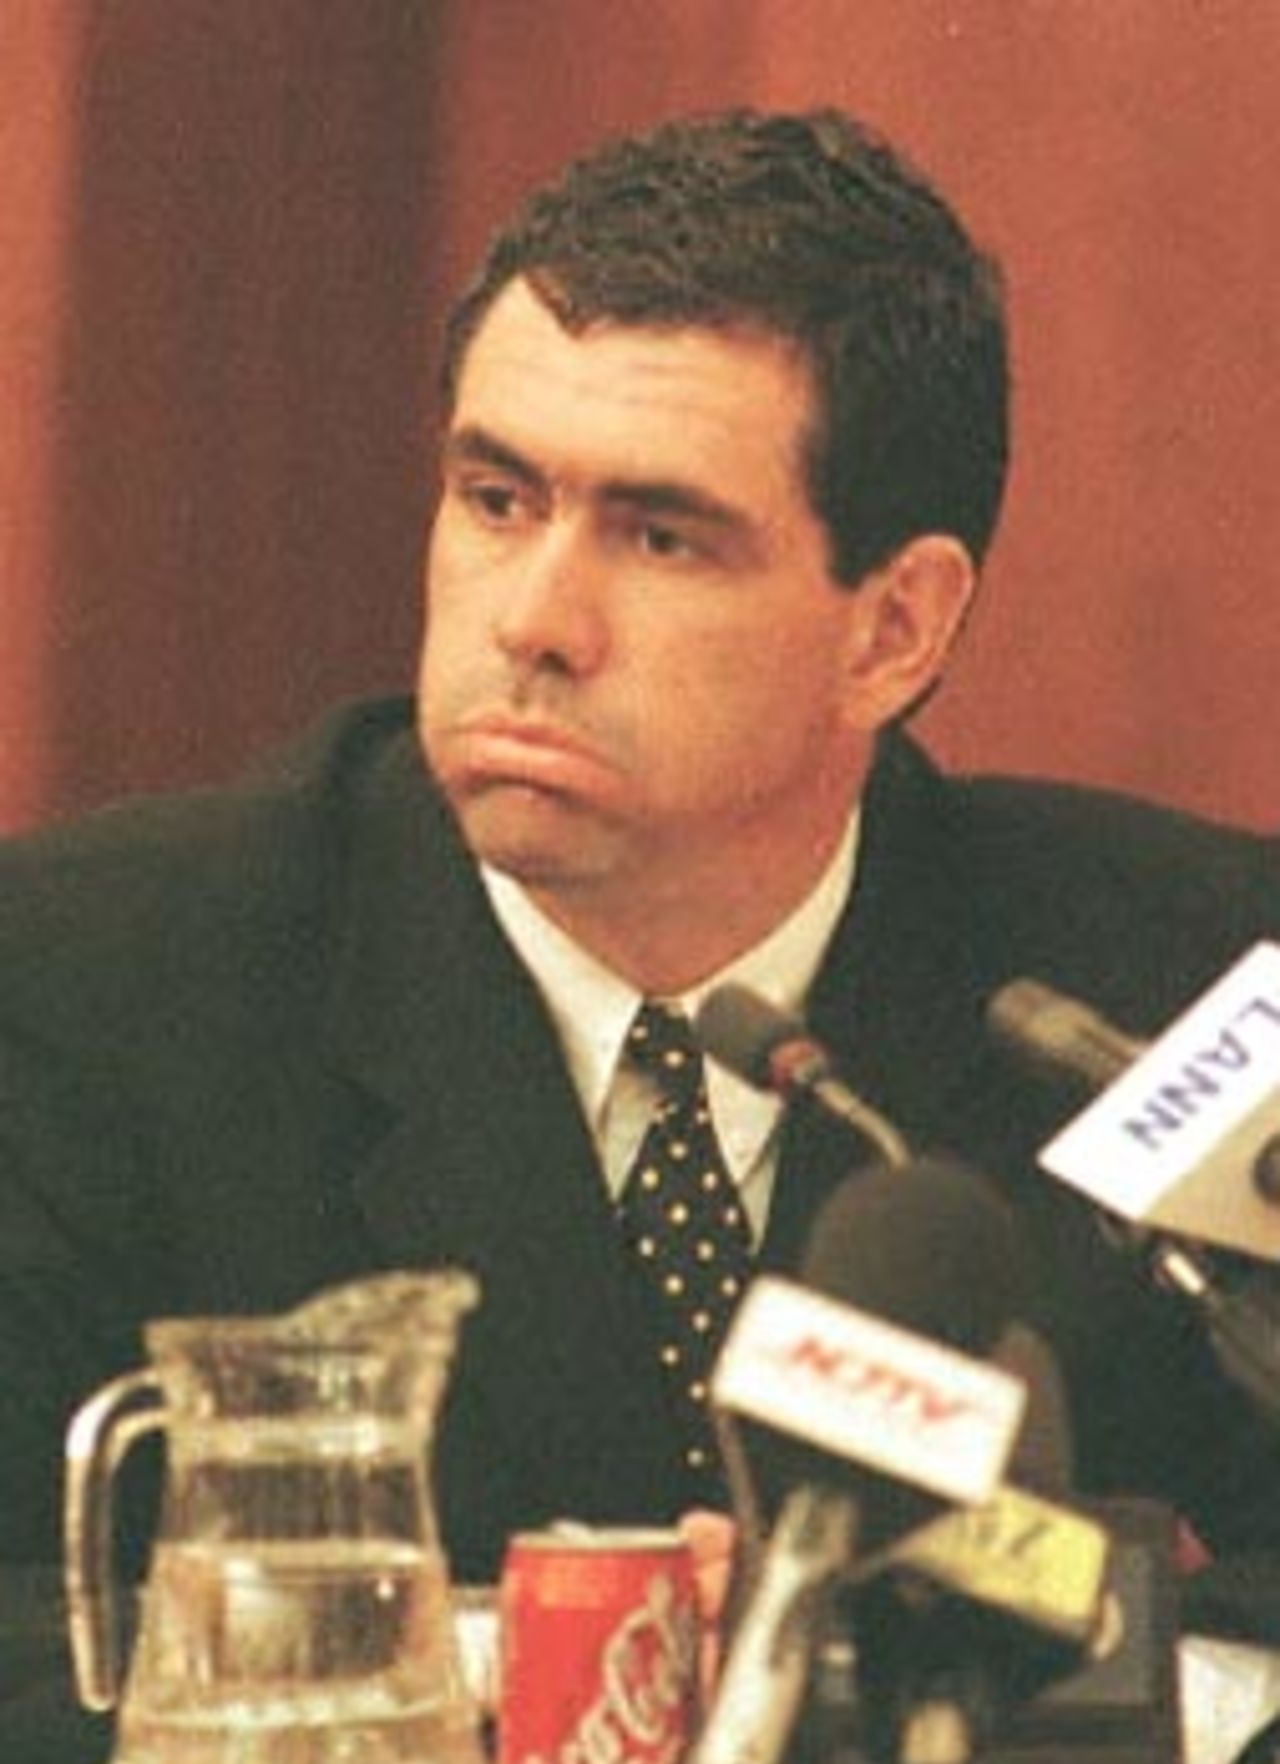 Former South African cricket captain Hansie Cronje puffs out his cheeks whilst giving his testimony at the King Commission of Inquiry into allegations of cricket match-fixing in Cape Town 21 June 2000.